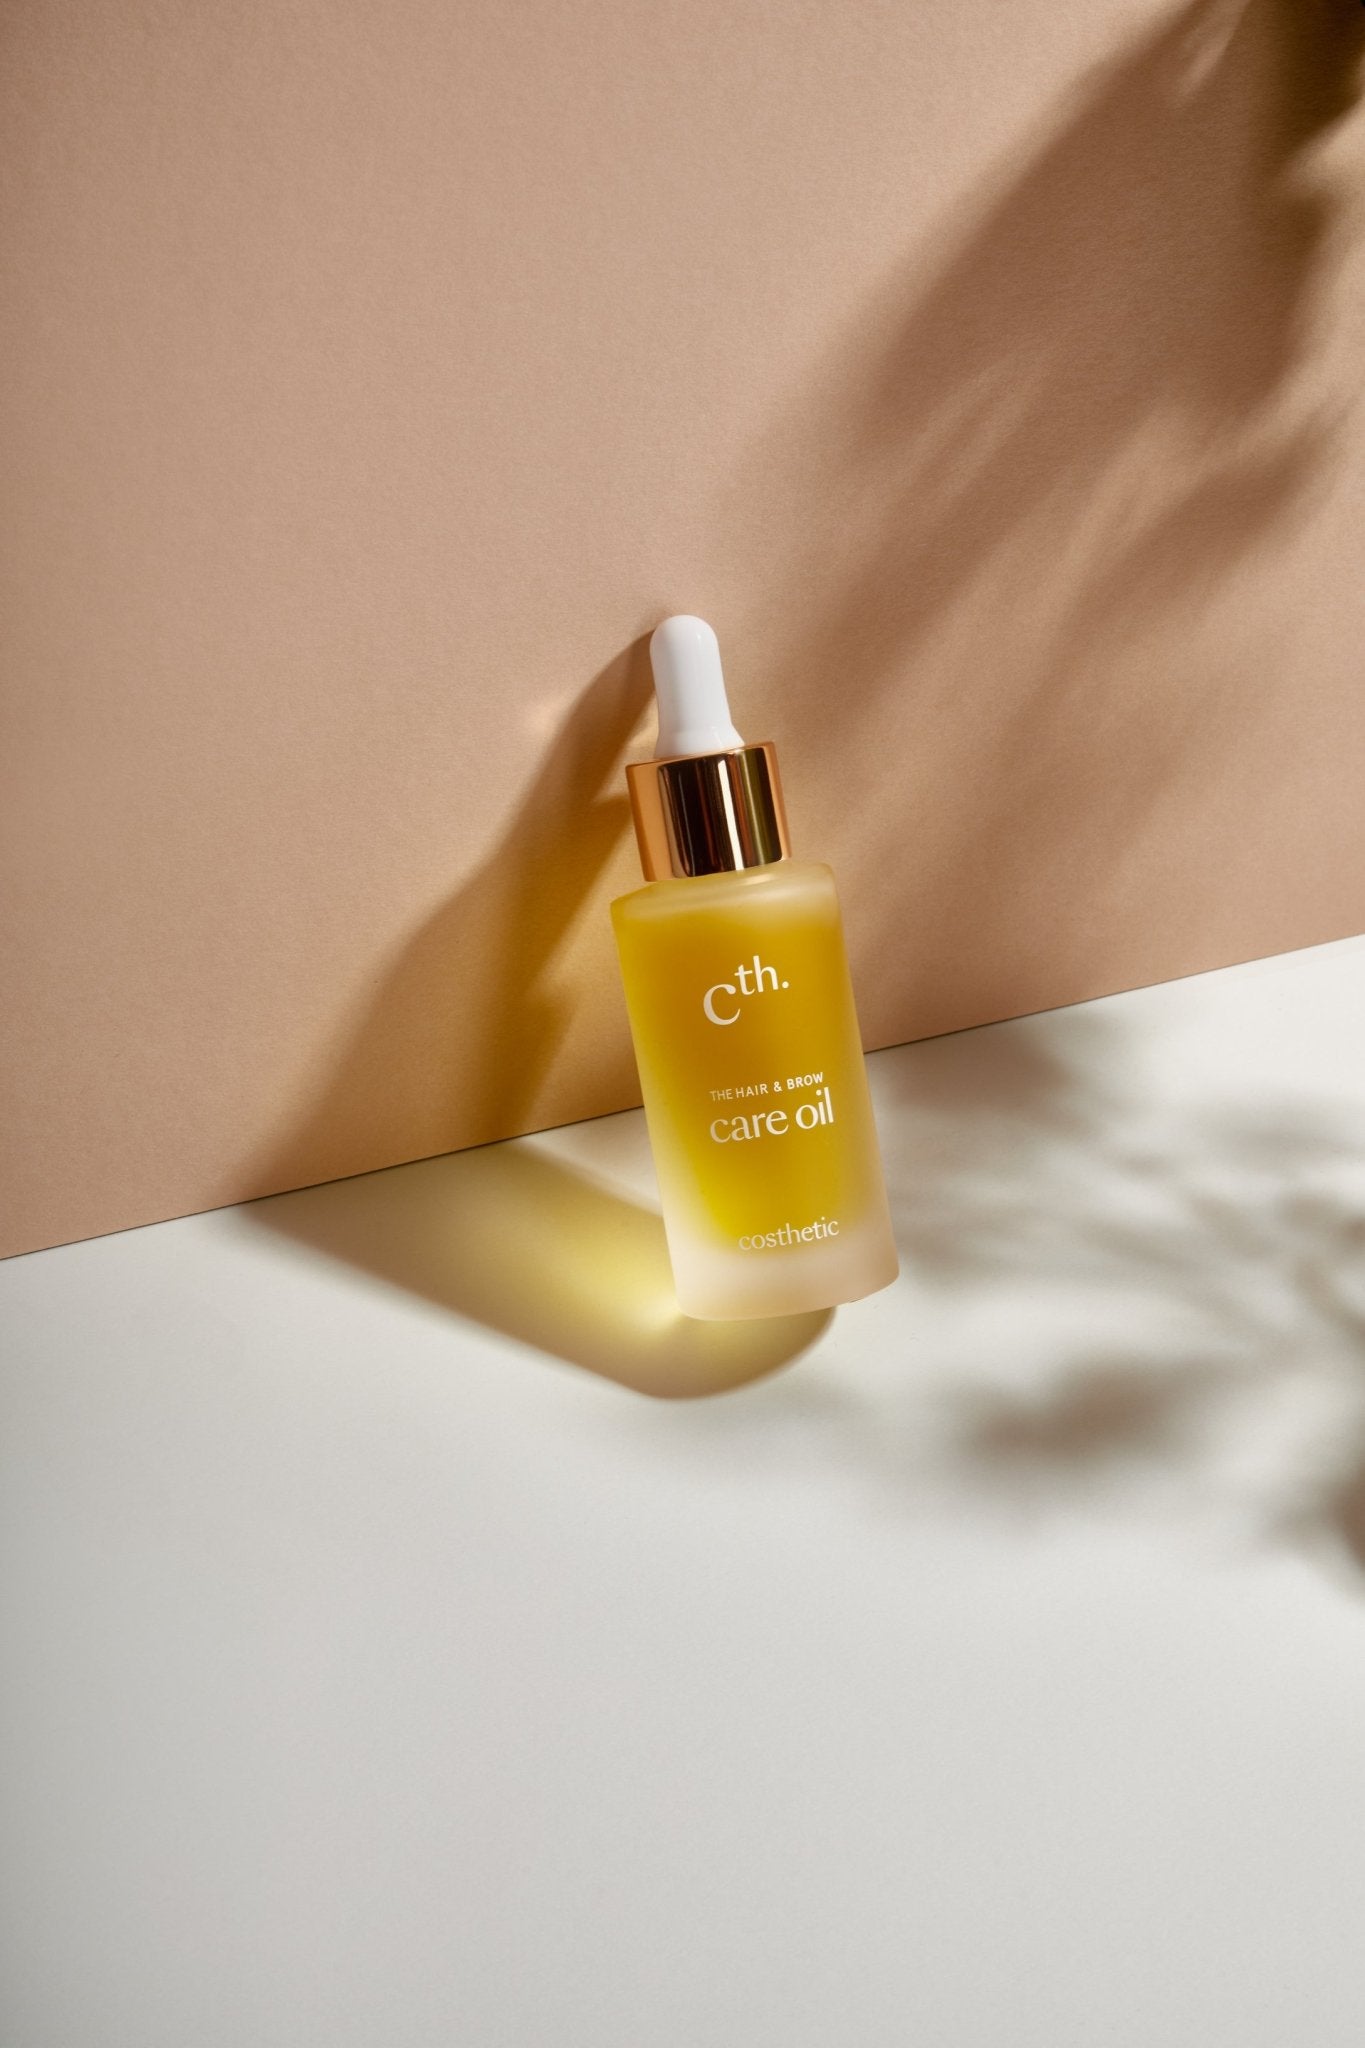 The Hair&Brow Care Oil - Costhetic